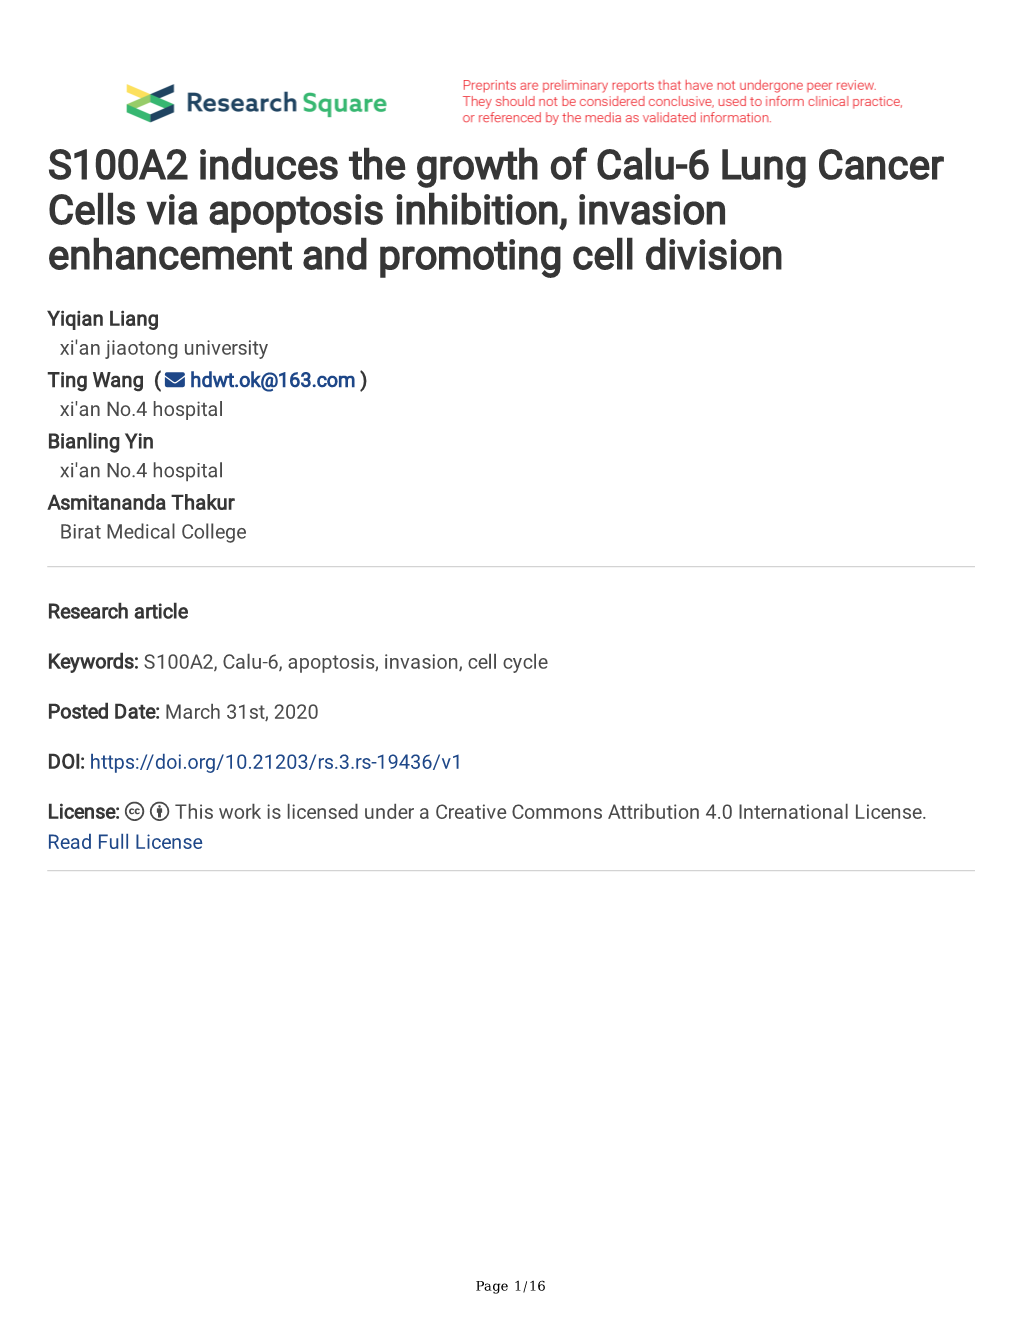 S100A2 Induces the Growth of Calu-6 Lung Cancer Cells Via Apoptosis Inhibition, Invasion Enhancement and Promoting Cell Division